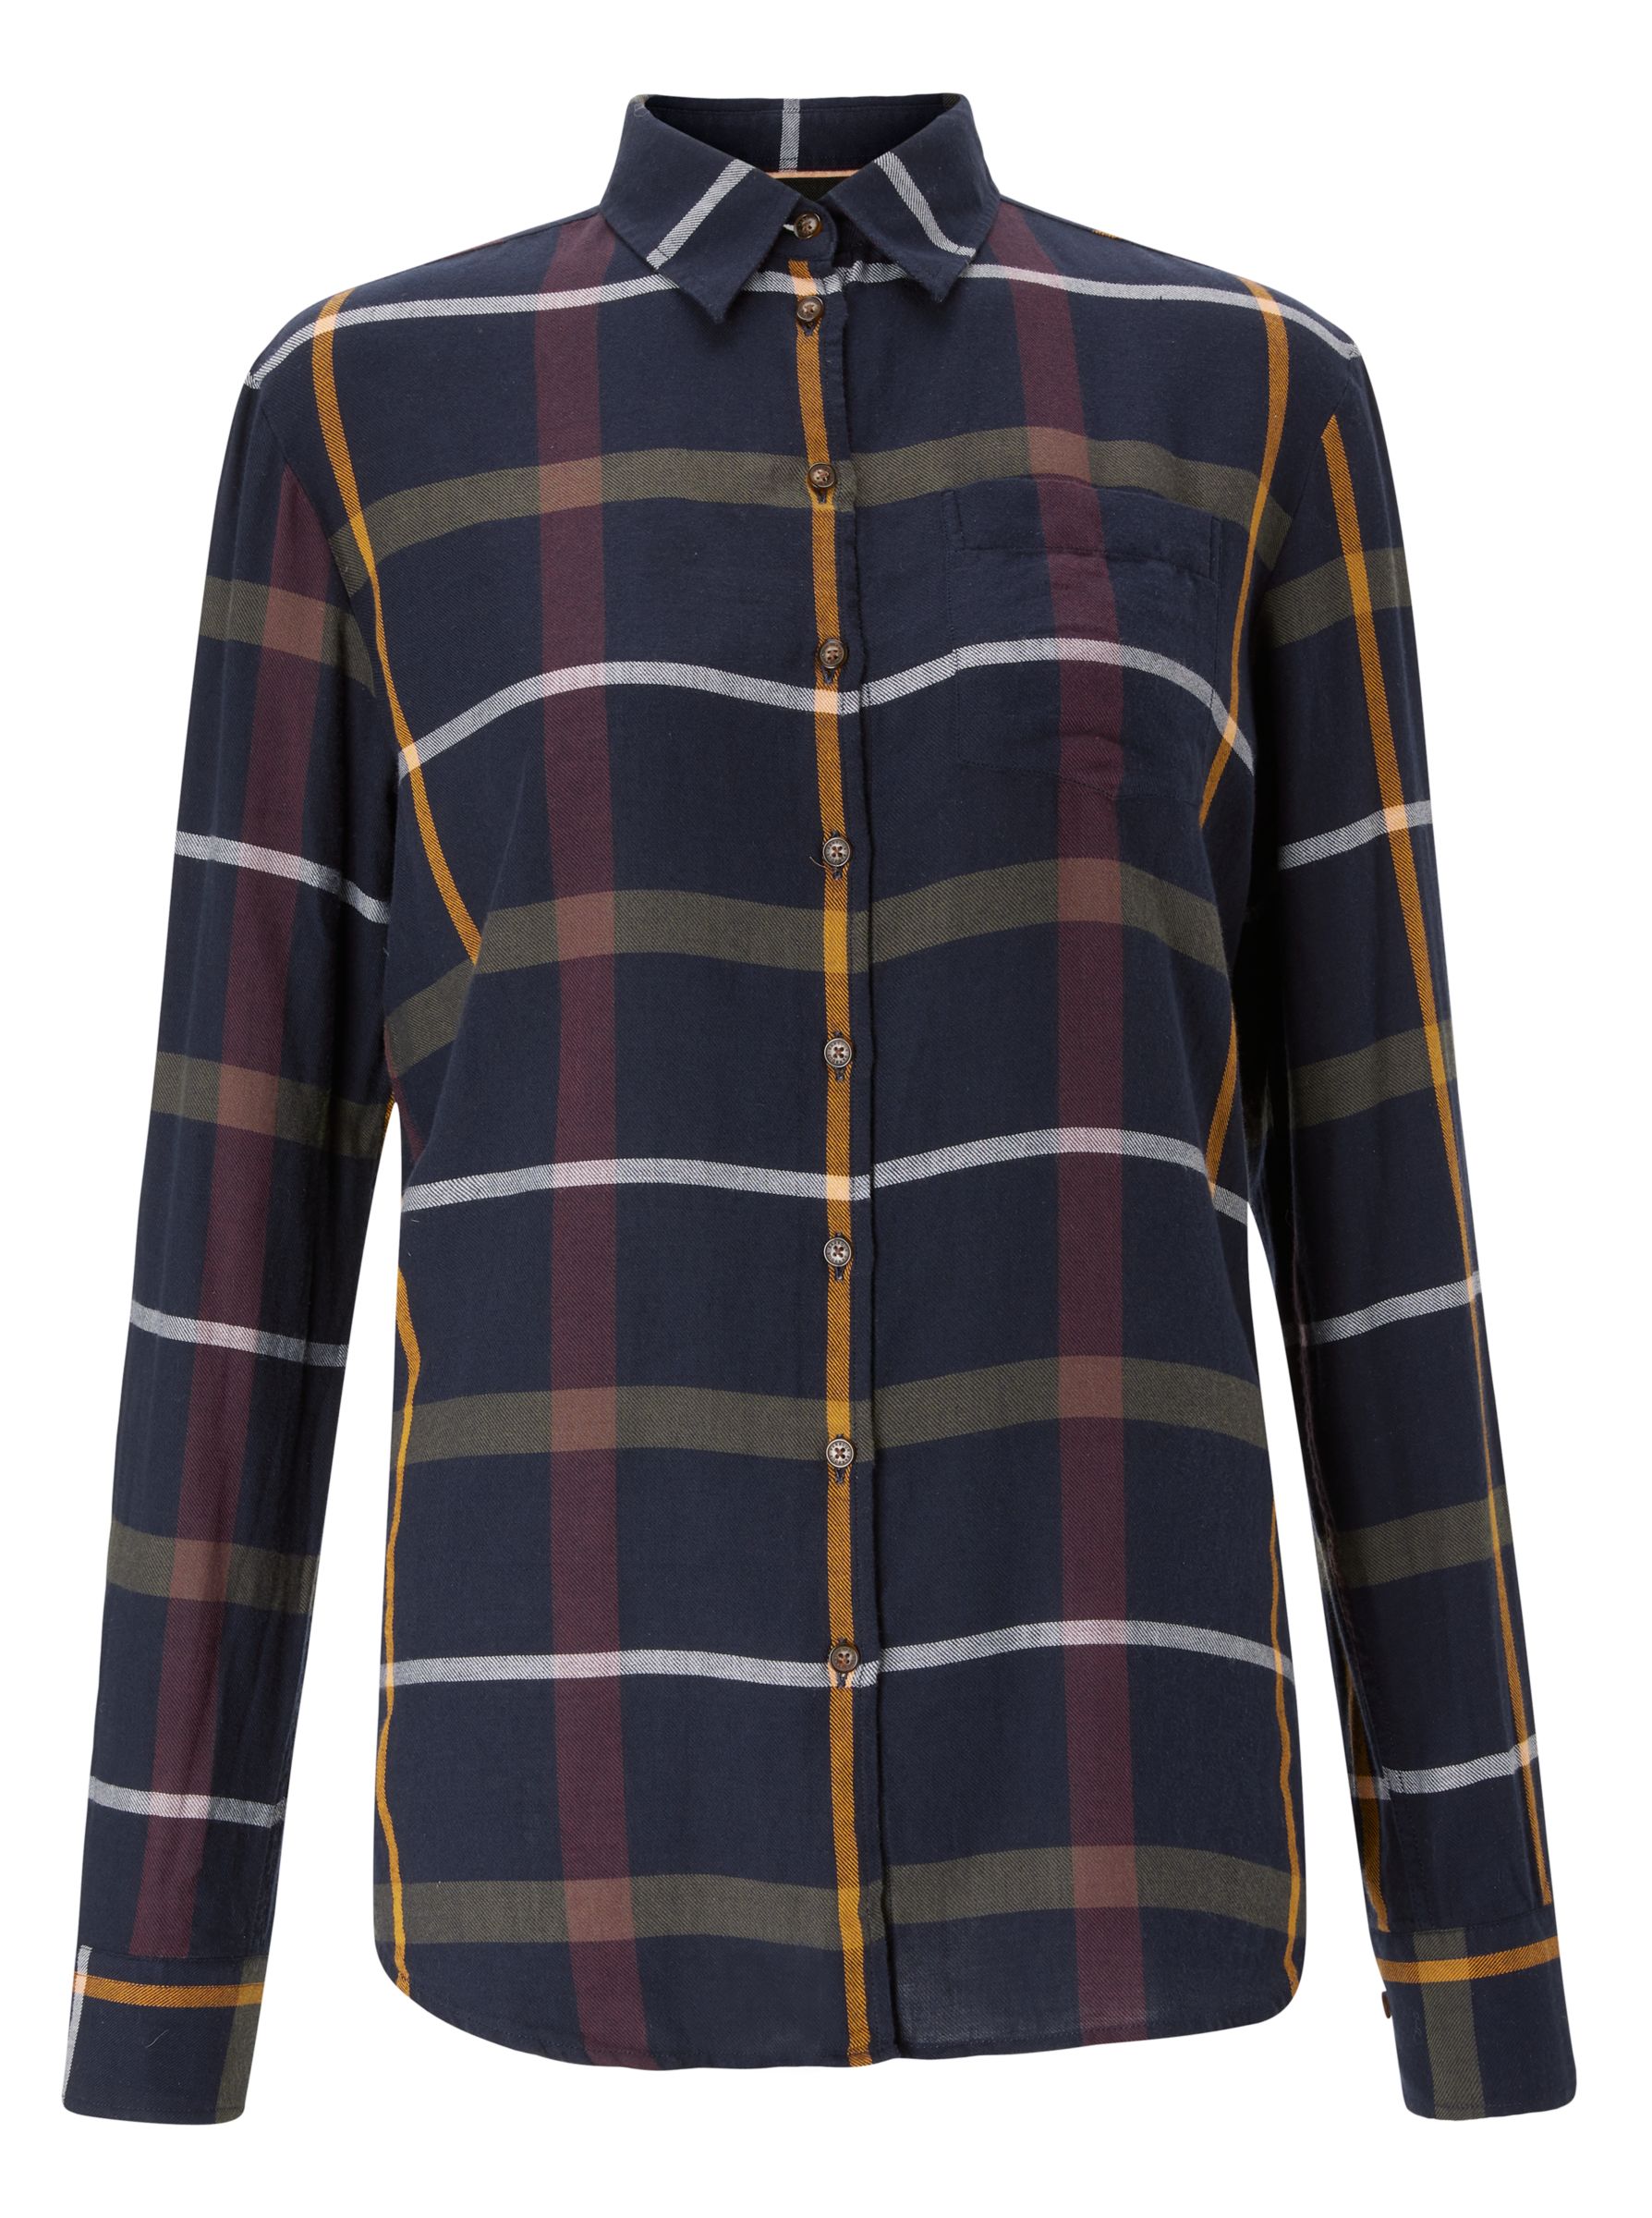 barbour oxer shirt